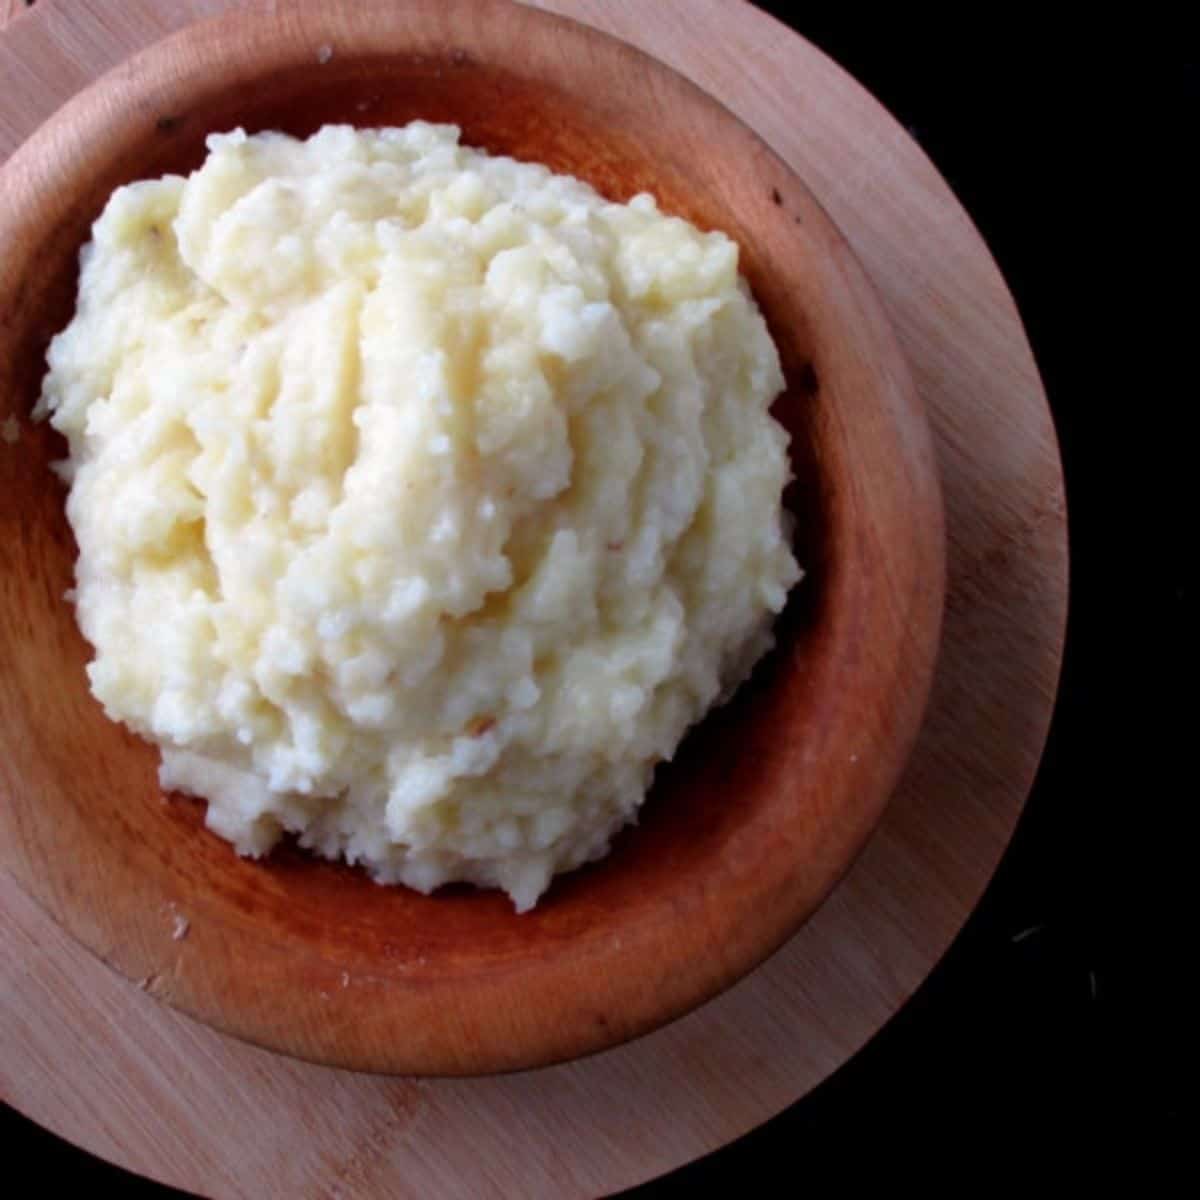 A wood bowl of whipped mashed potatoes sitting on a different colored wood board.